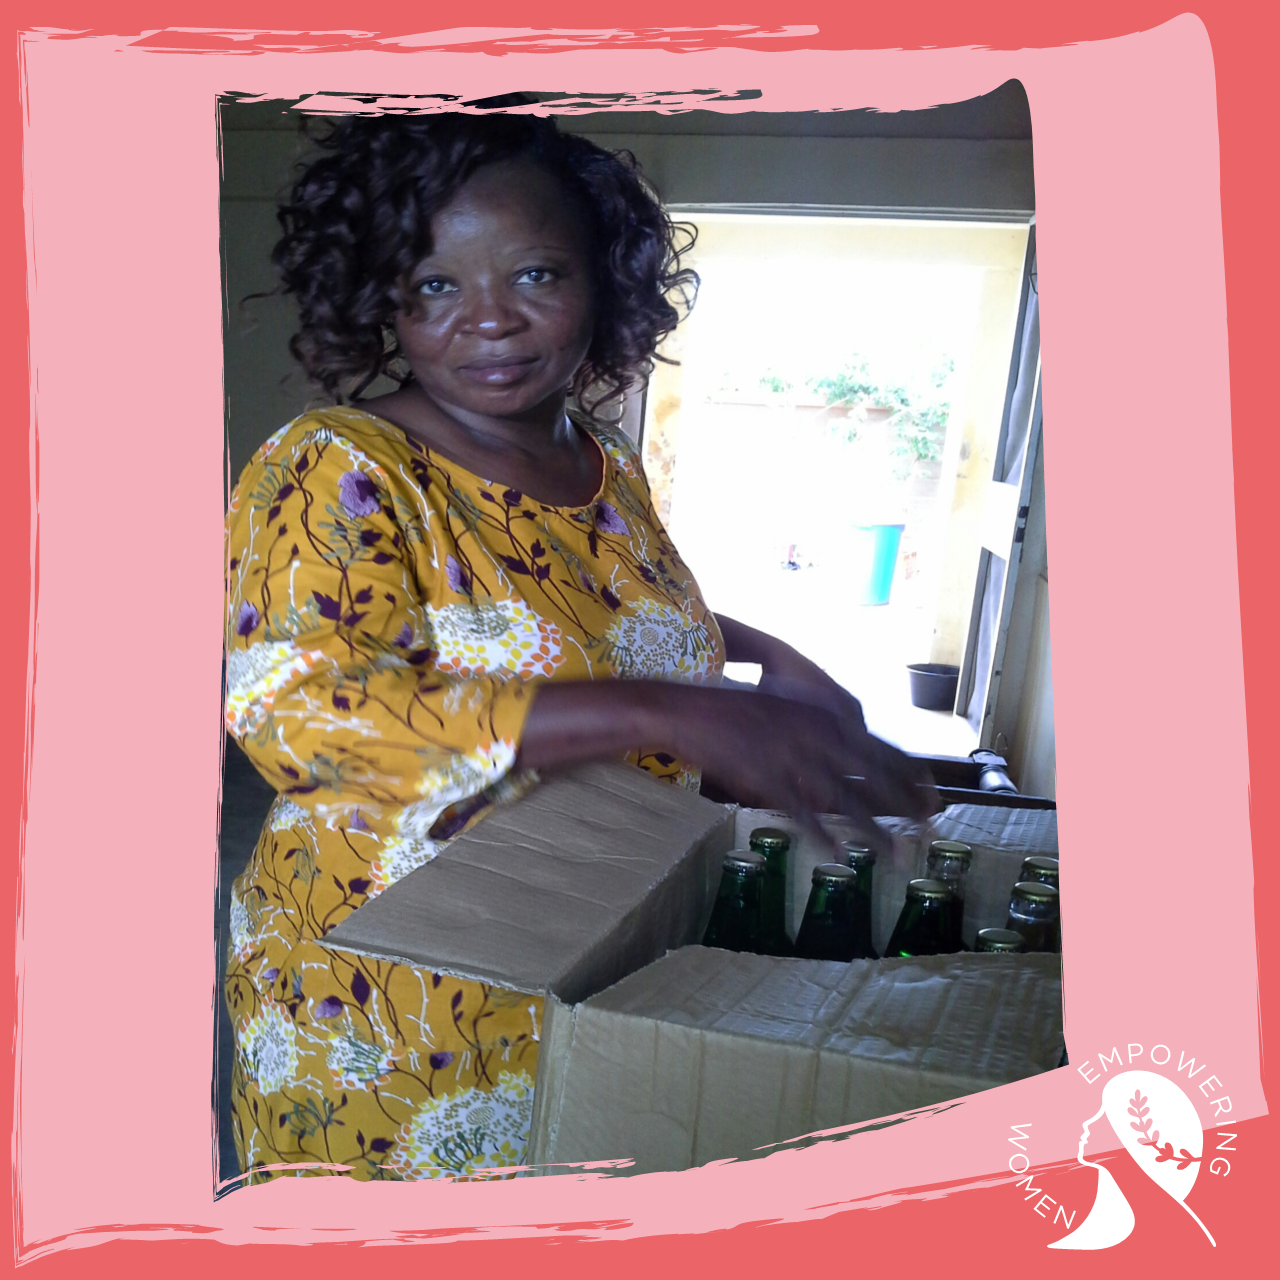 "Thank you to L'Occitane for its support. For us women who find it difficult to gain the trust of financial institutions, this type of project takes a big thorn out of our side because it allows us to launch, relaunch and/or revitalize our business and to have more notoriety and credibility." Viviane Tiendrebeogo, winner of the small/MEBF prize (Maison de l'entreprise).